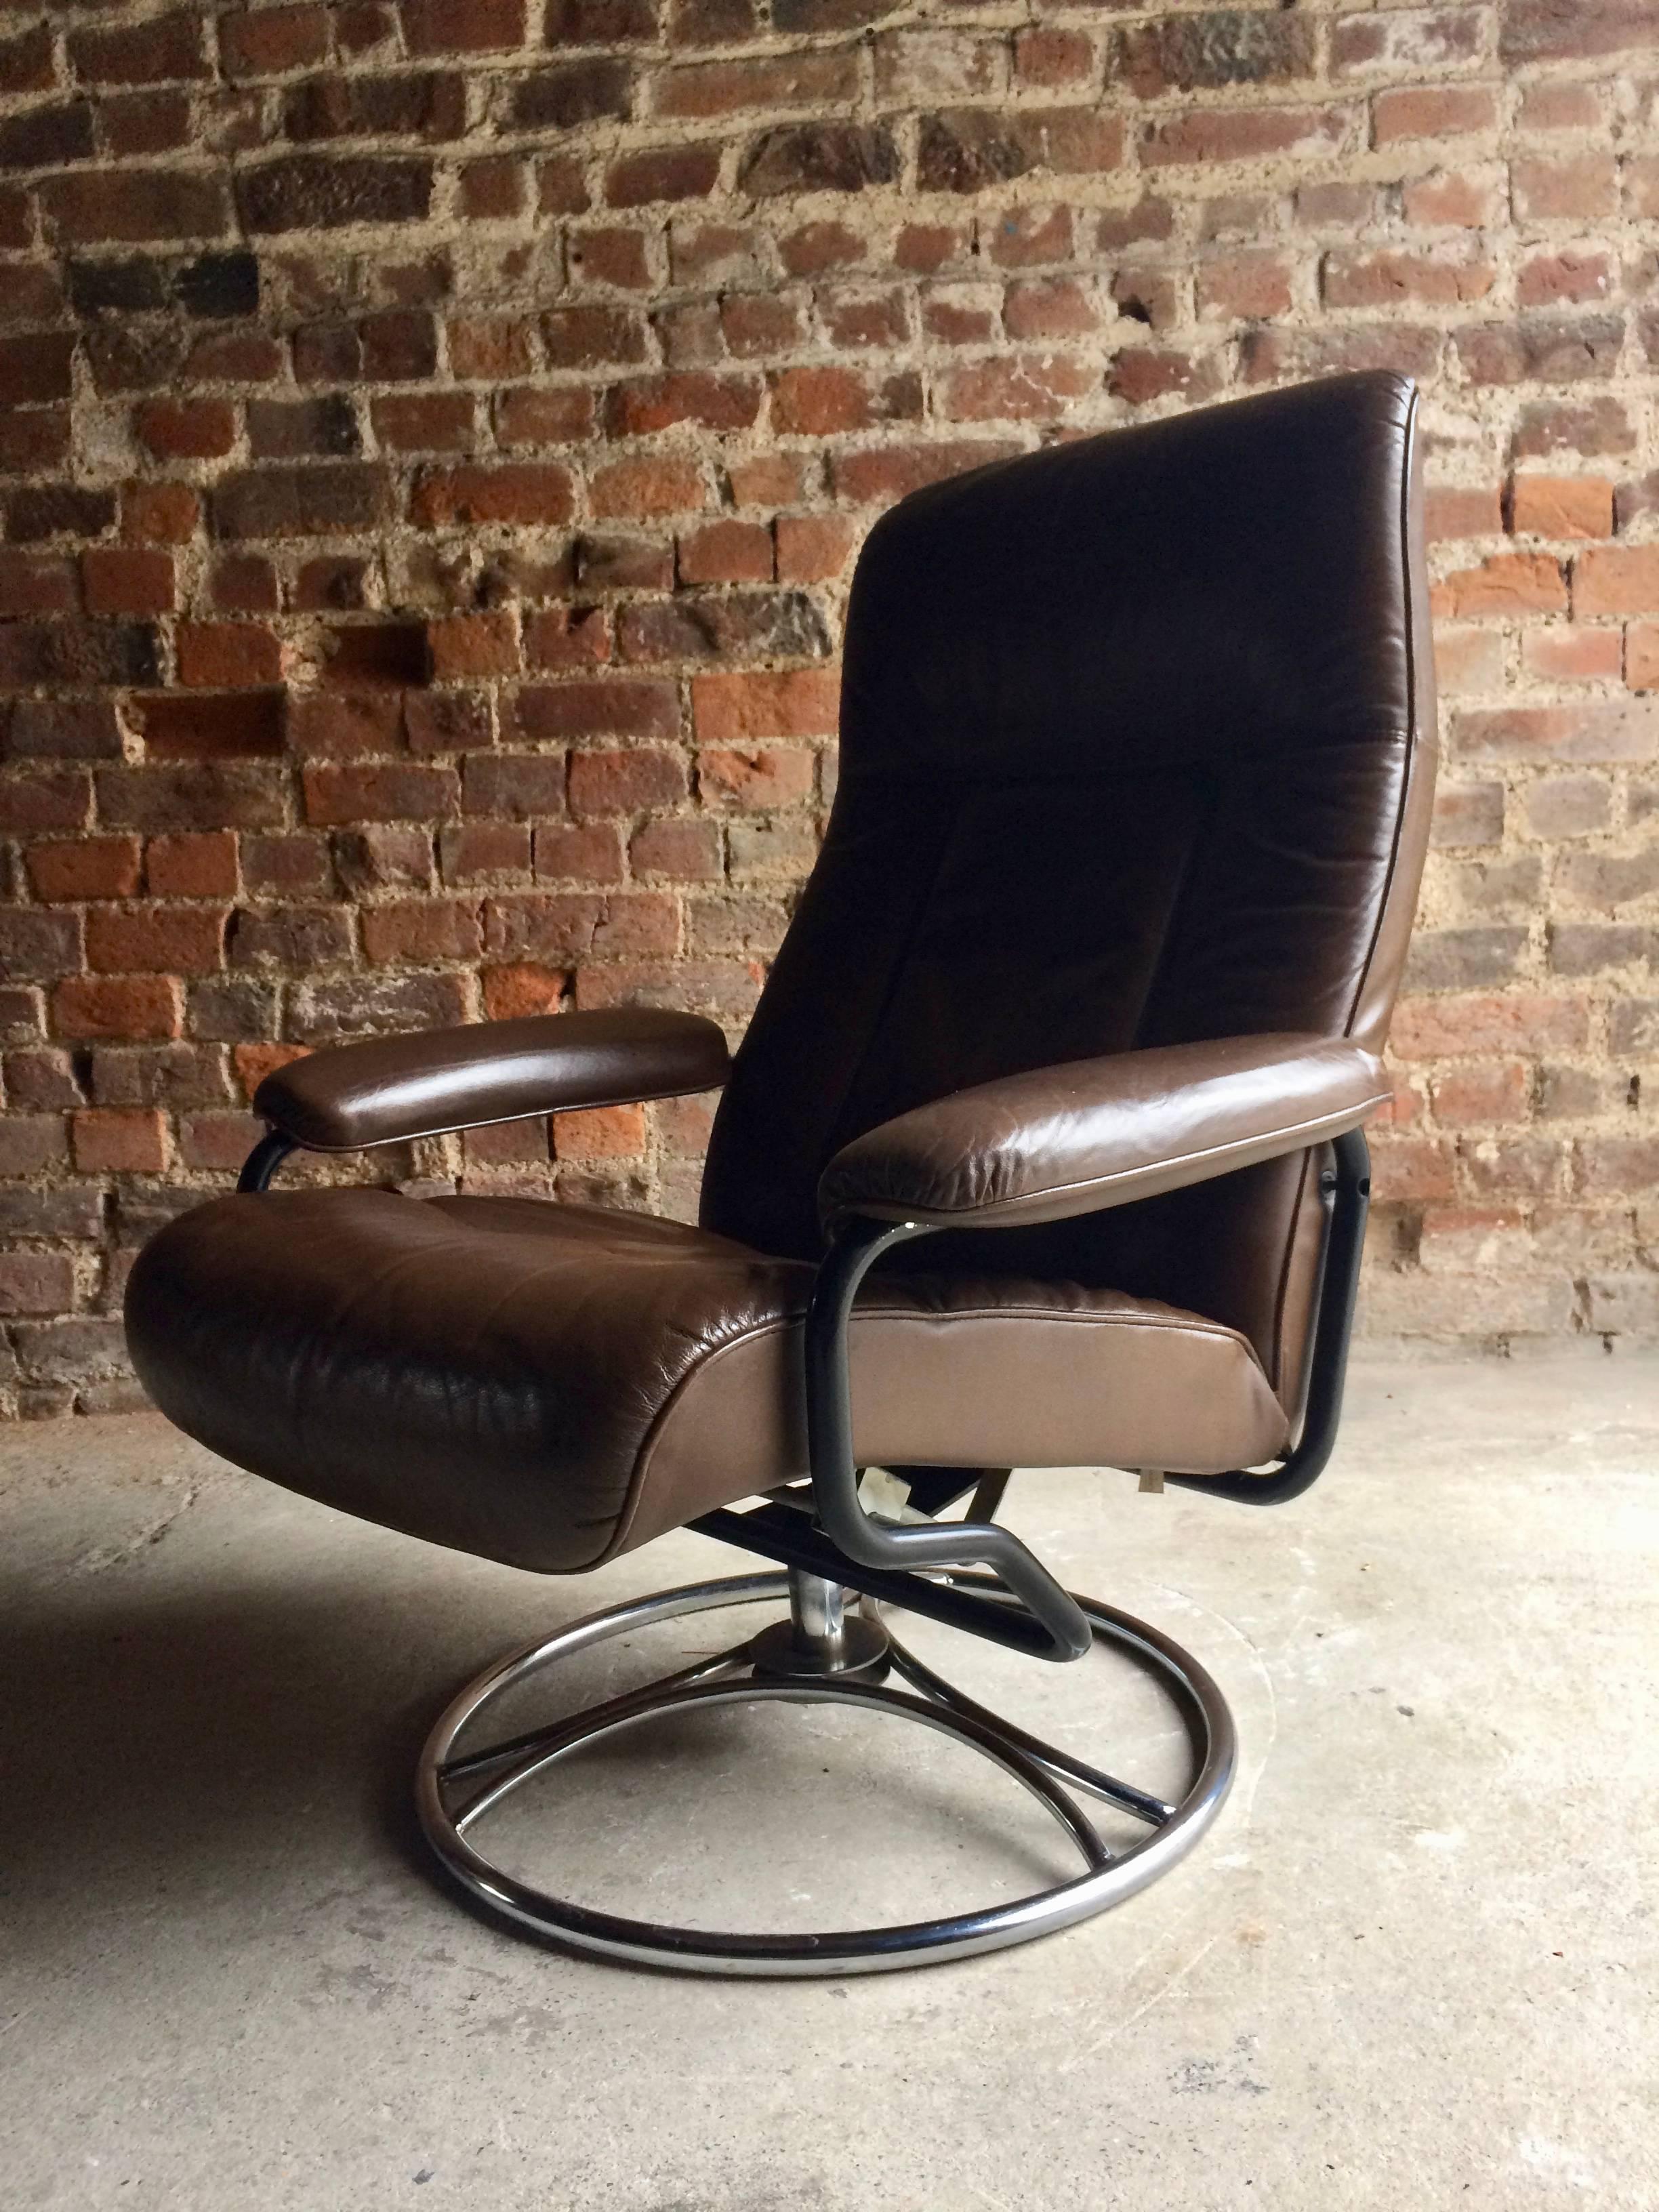 Late 20th Century Swedish Brown Leather Armchair Lounge Reclining Swivel Söderbergs, 1970s